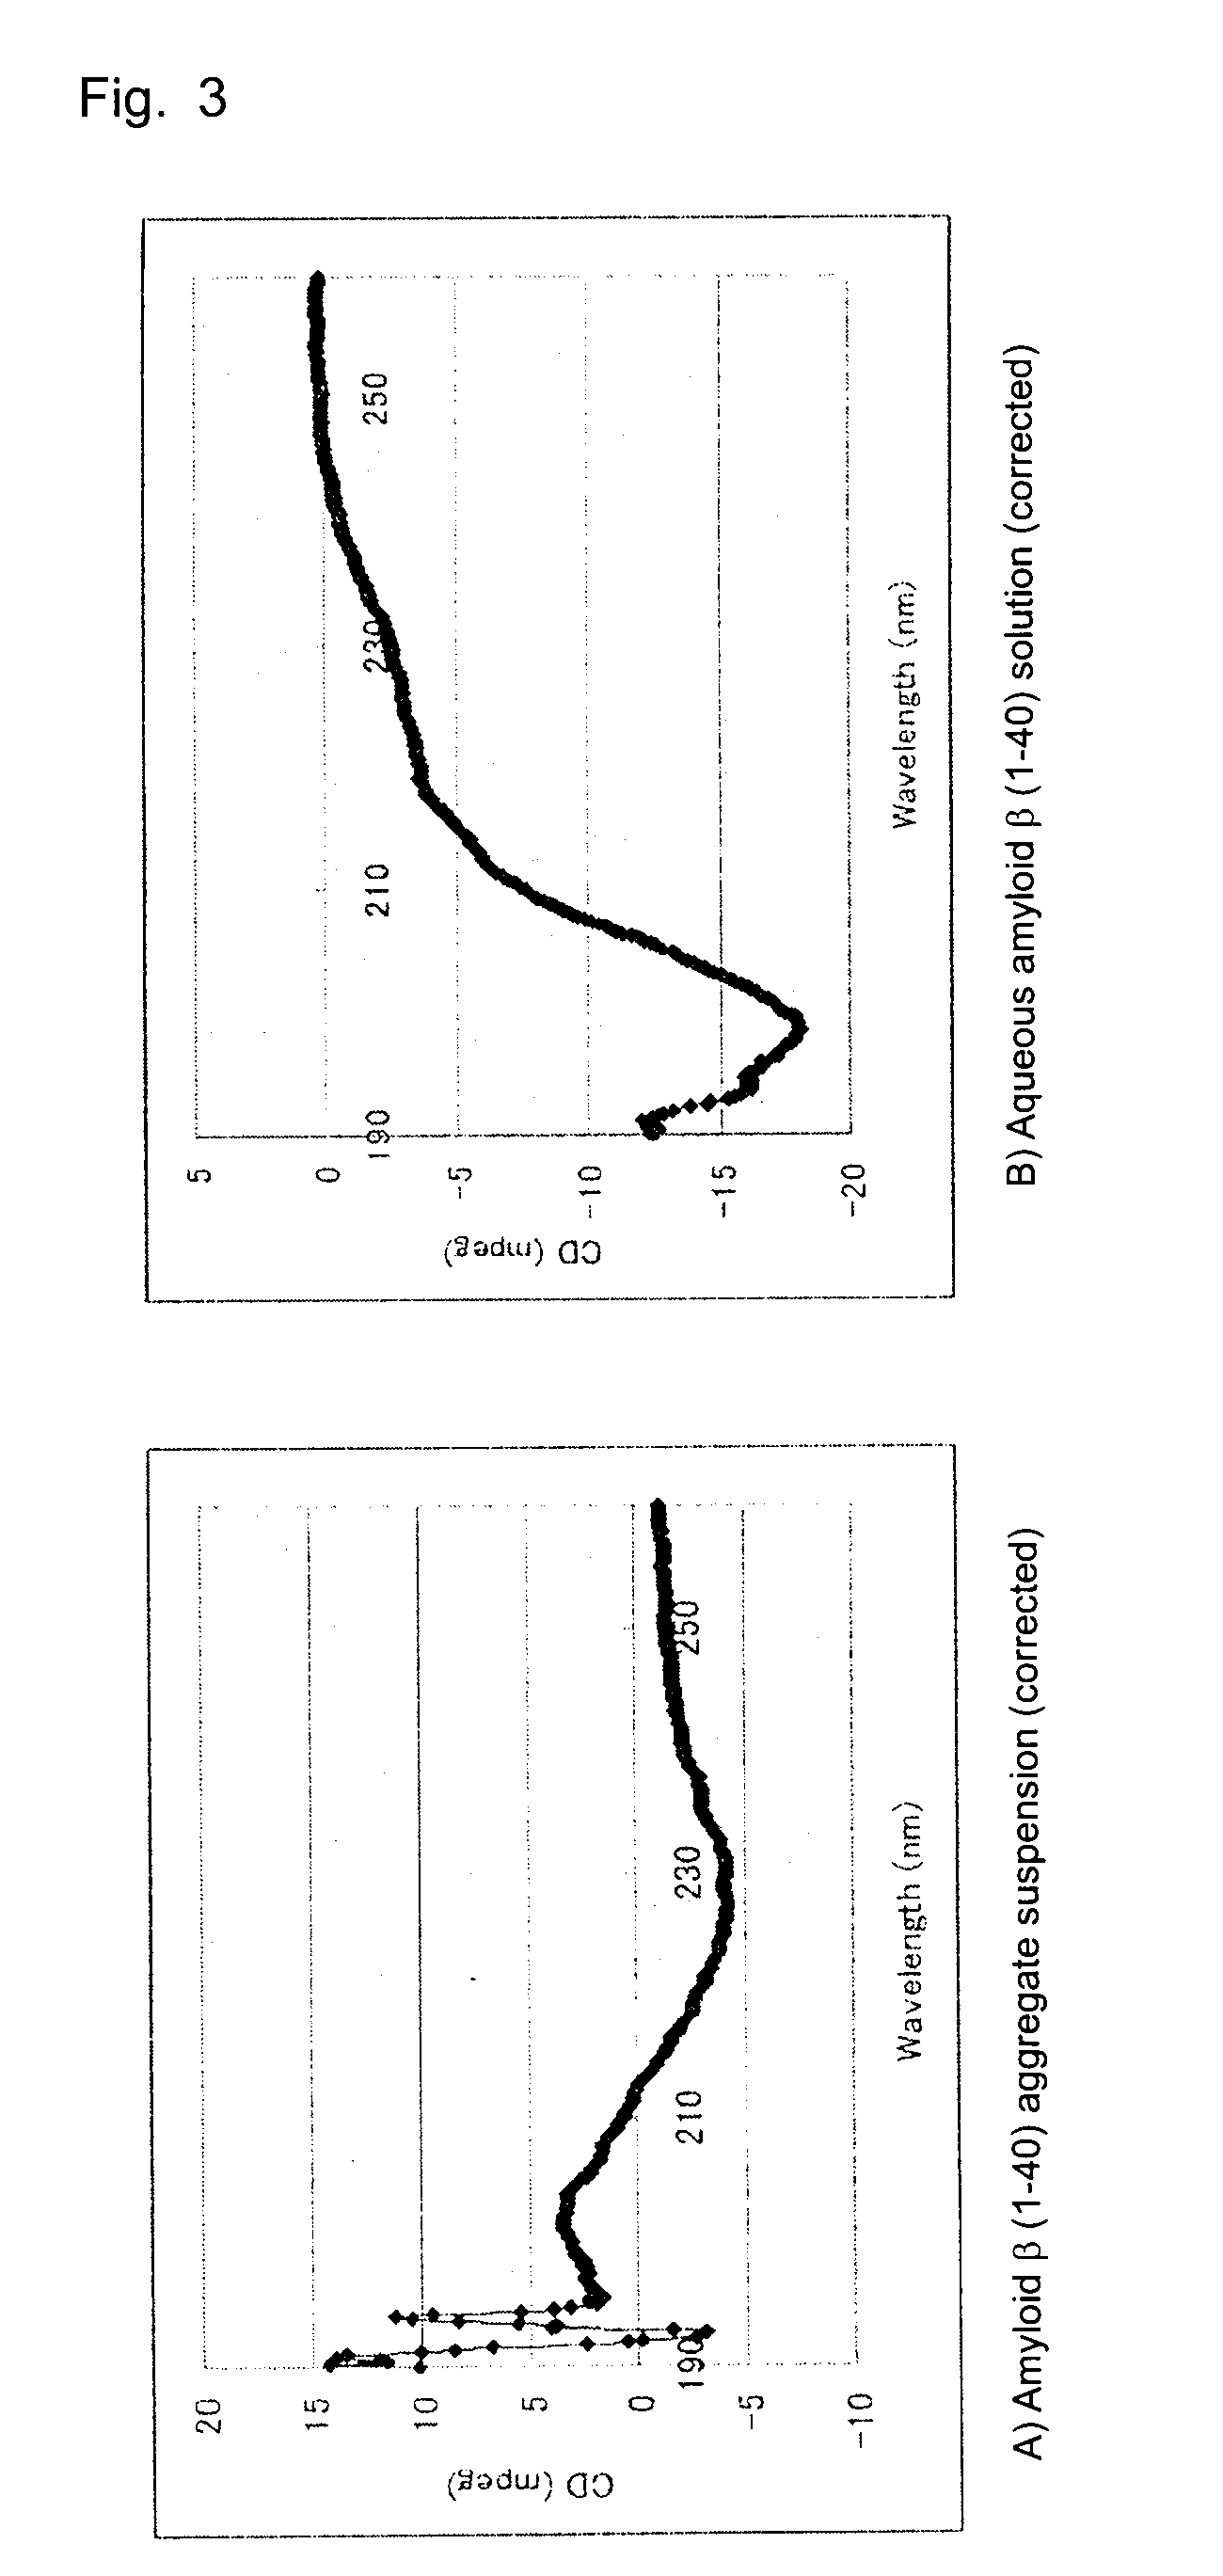 Diagnostic and remedy for disease caused by amyloid aggregation and/or deposition